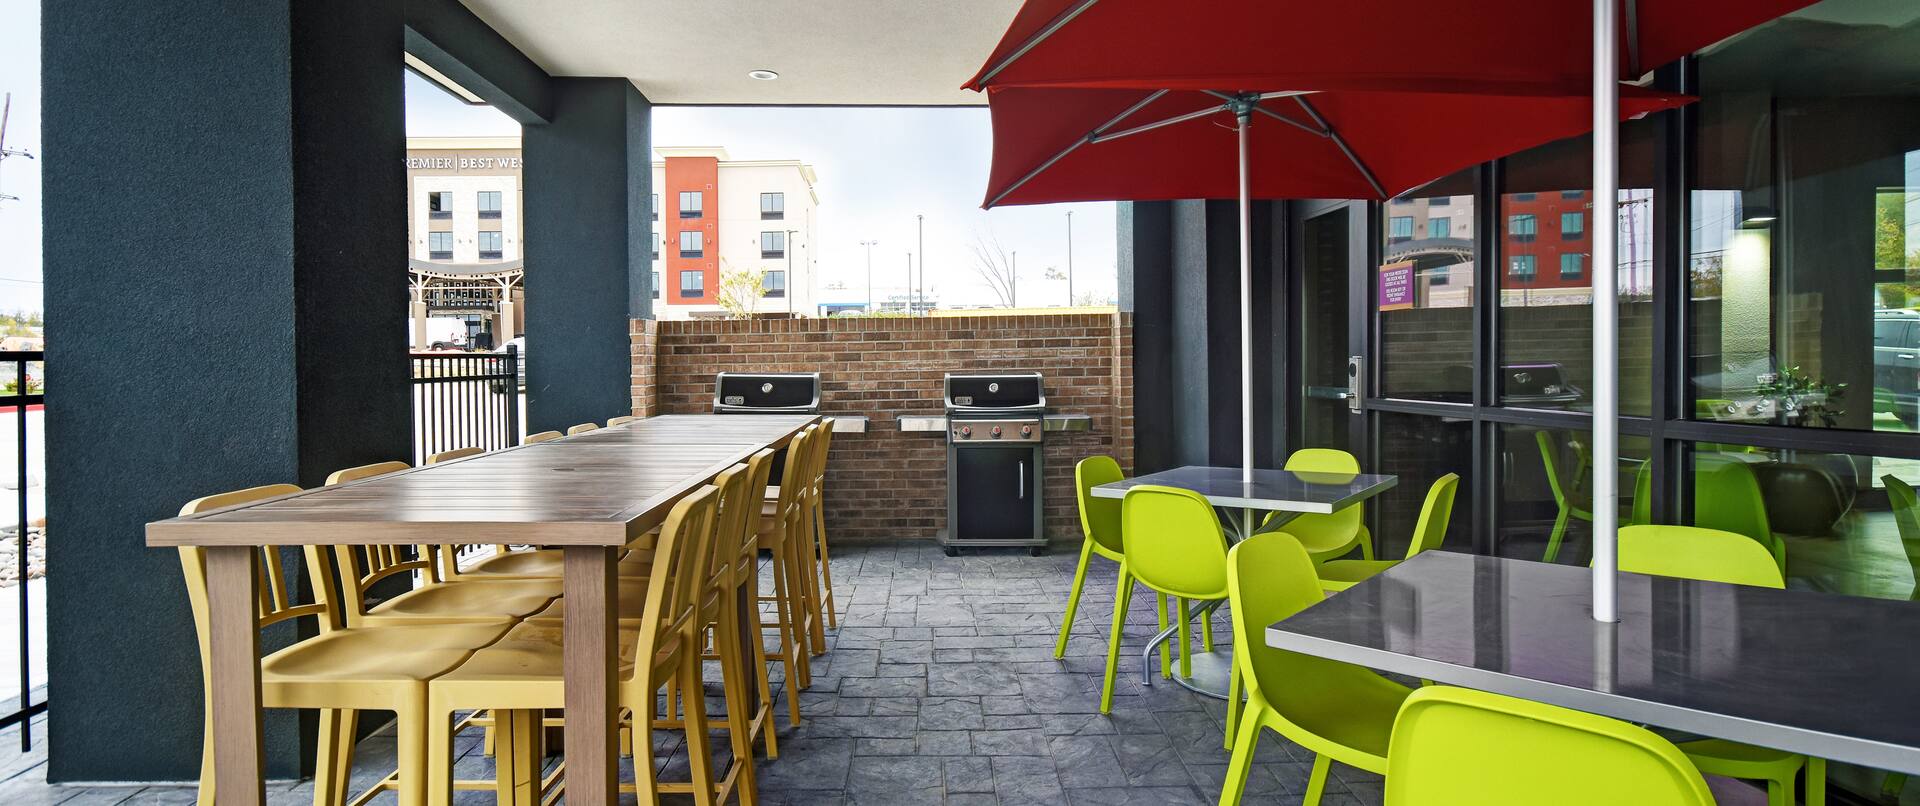 Patio With Barbeques 